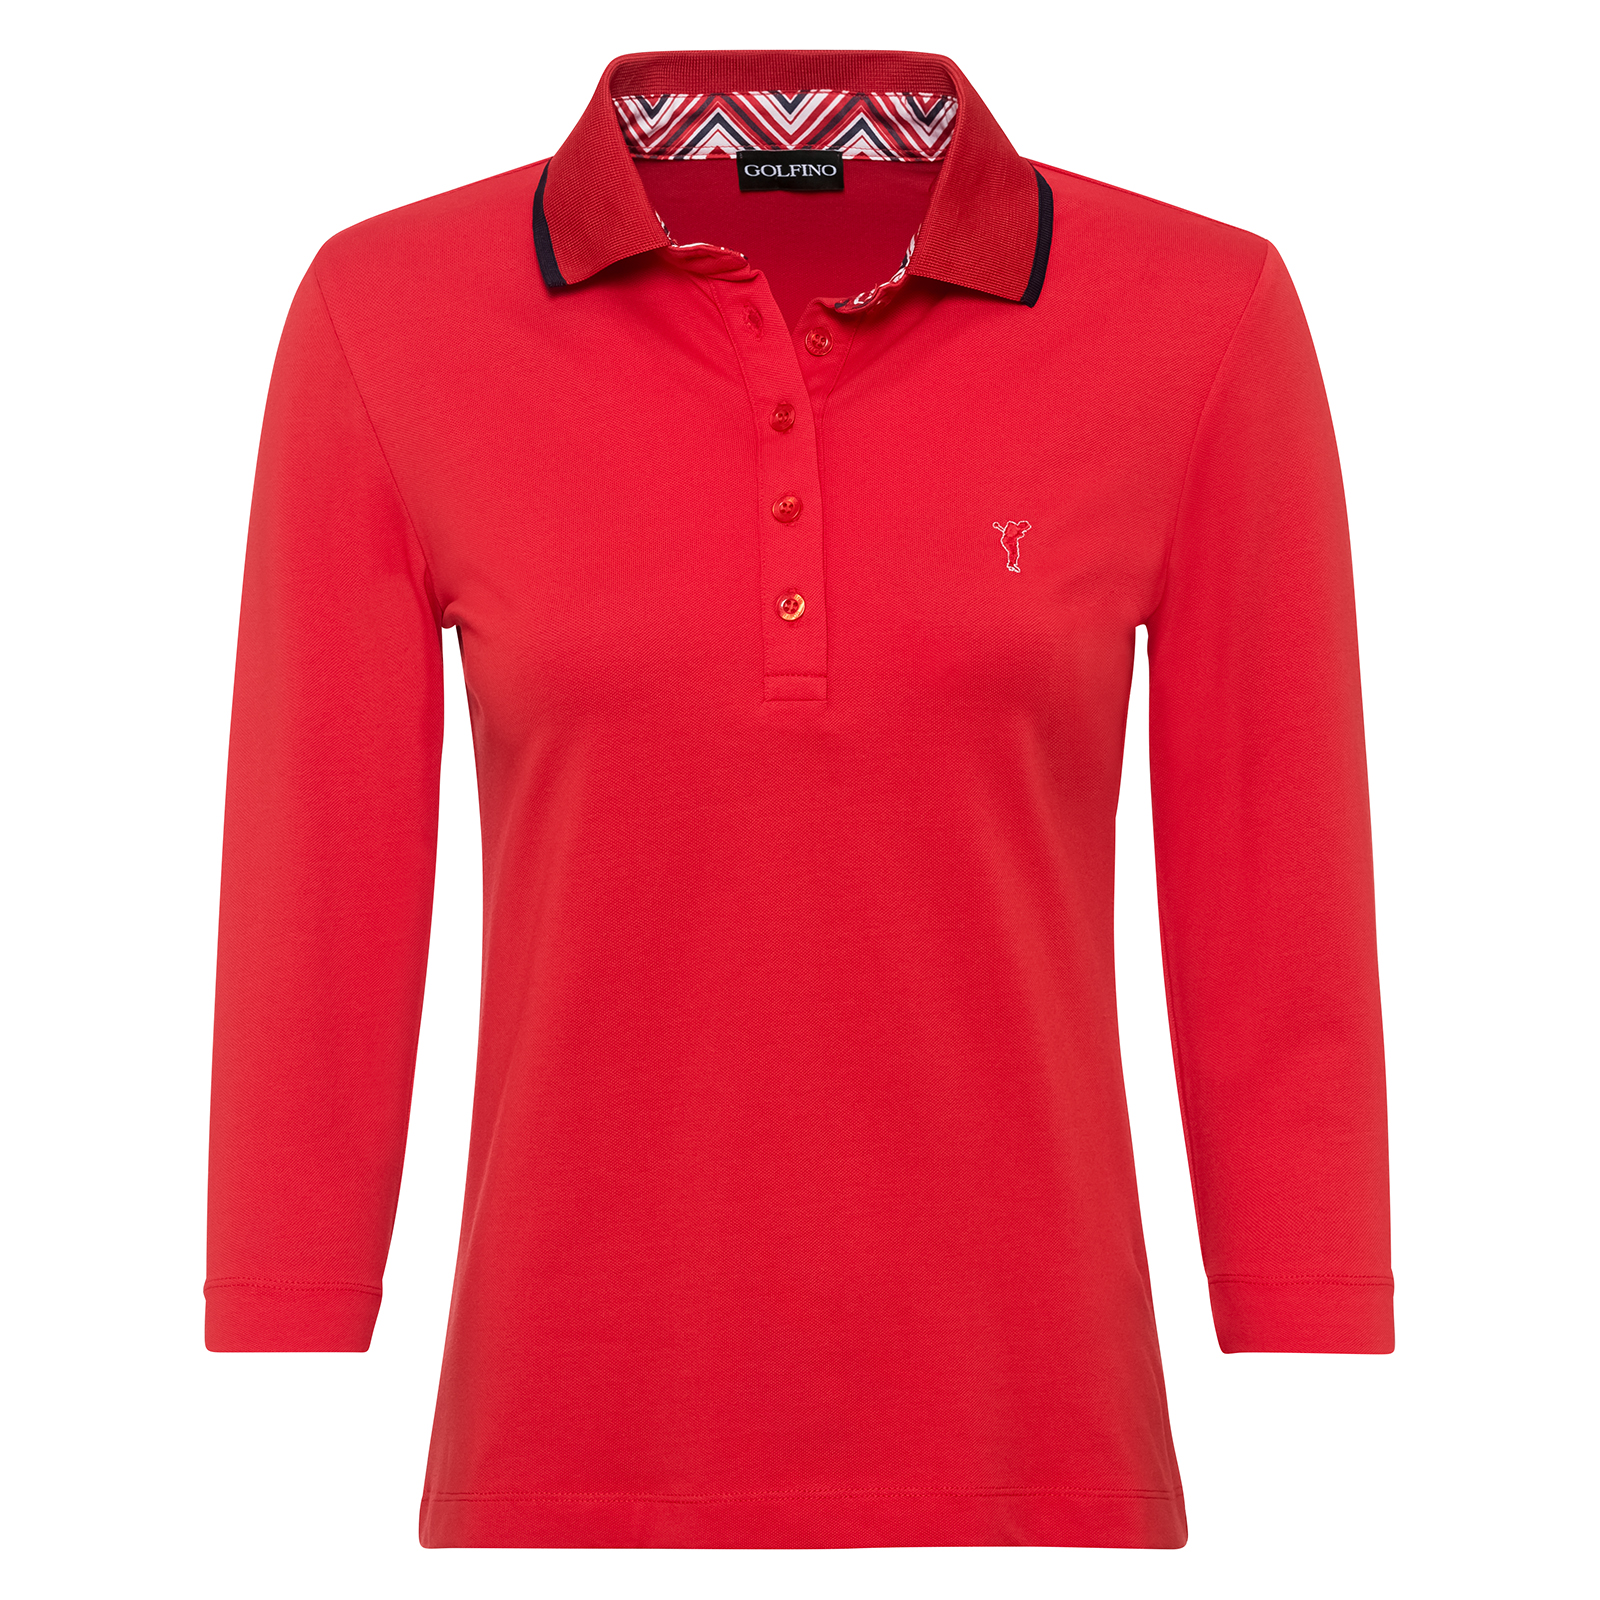 Ladies' golf polo shirt with ultraviolet protection factor 